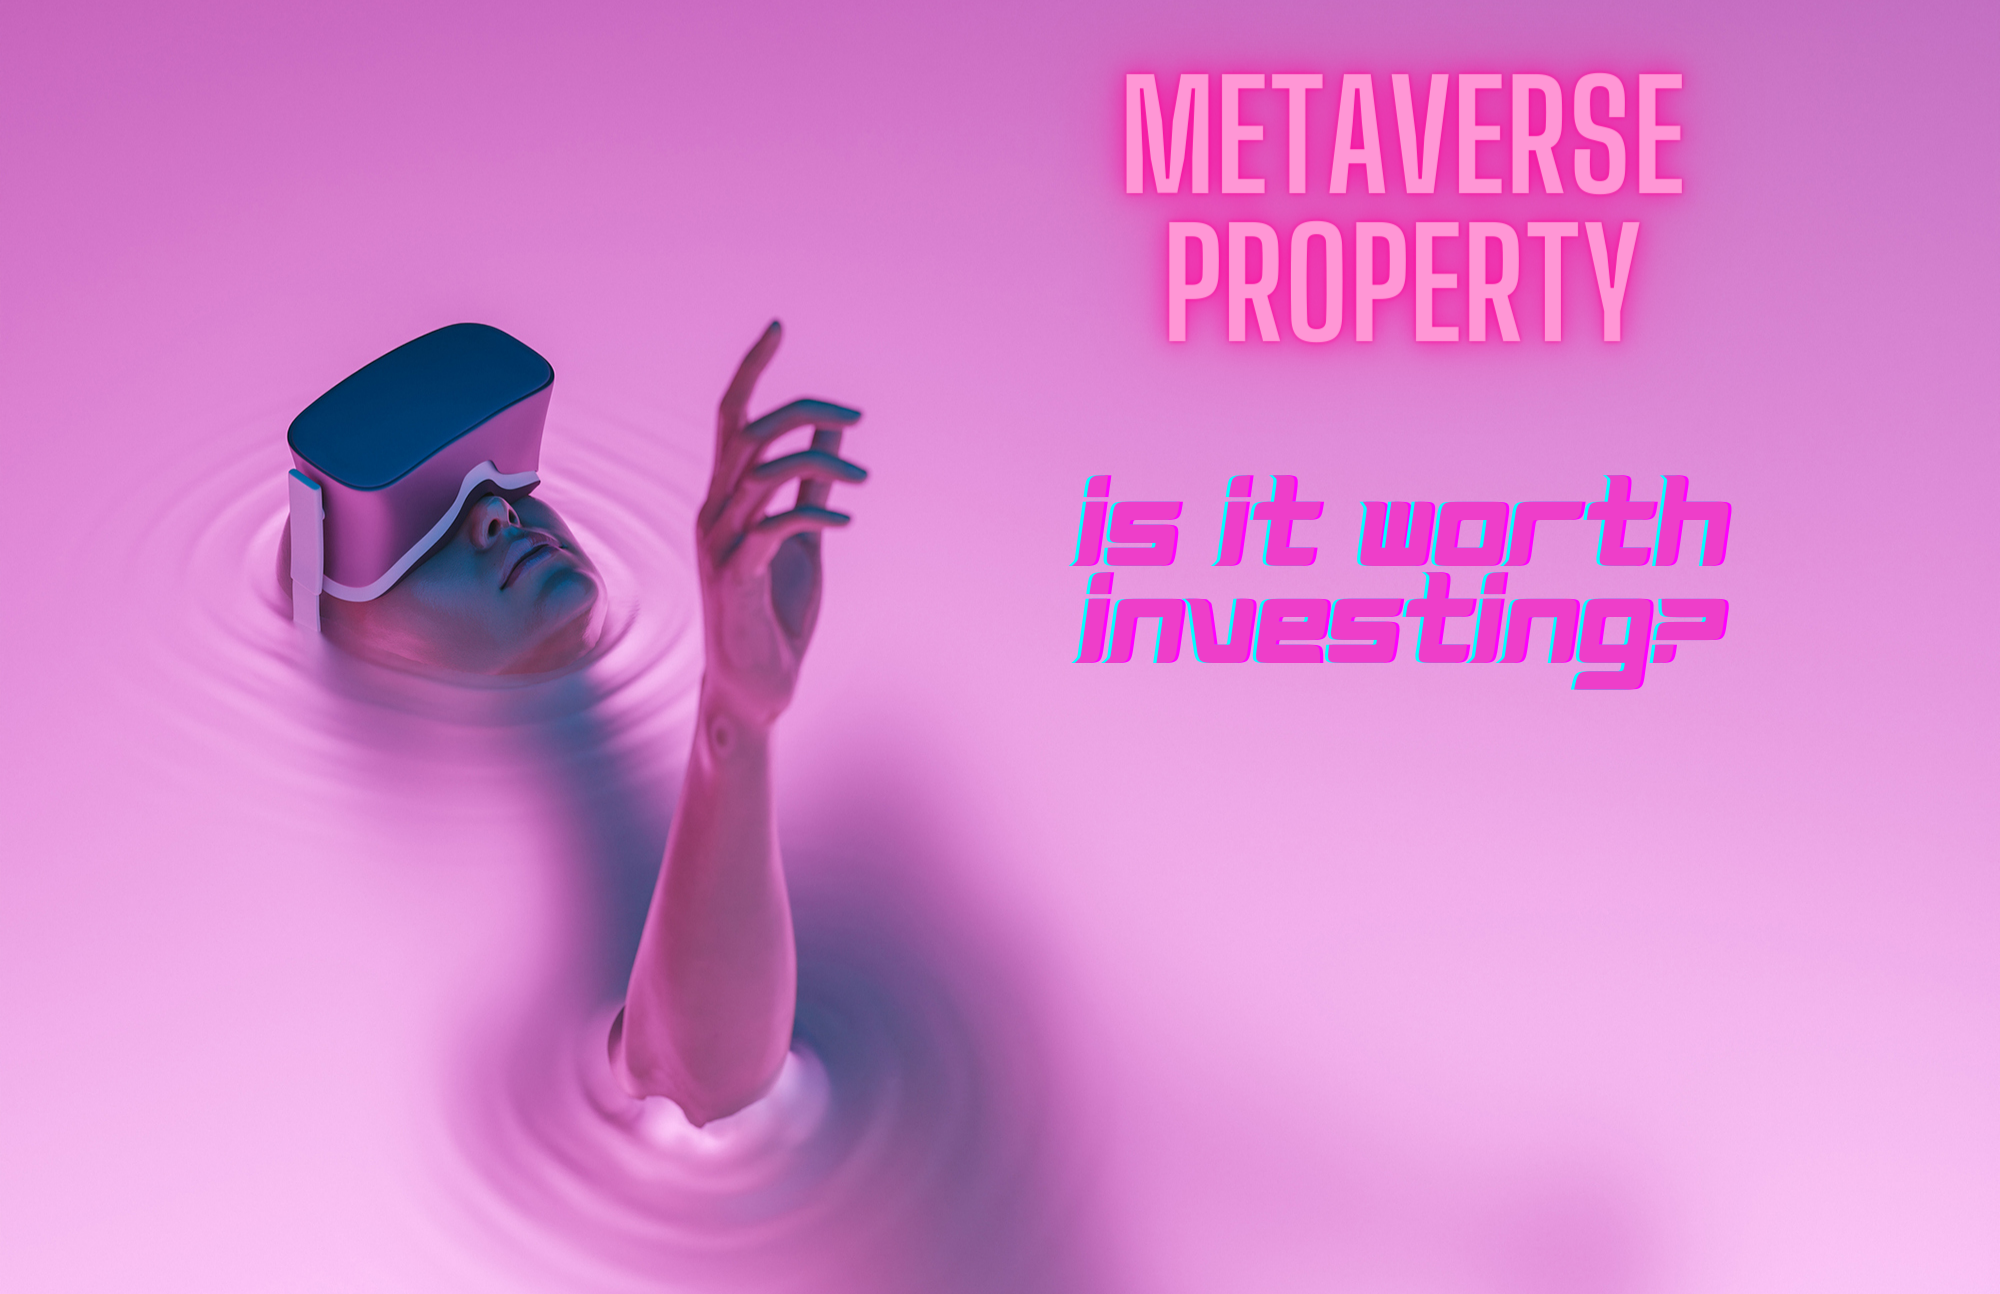 Metaverse Property - Is It Worth Investing In The Future Virtual Reality World?